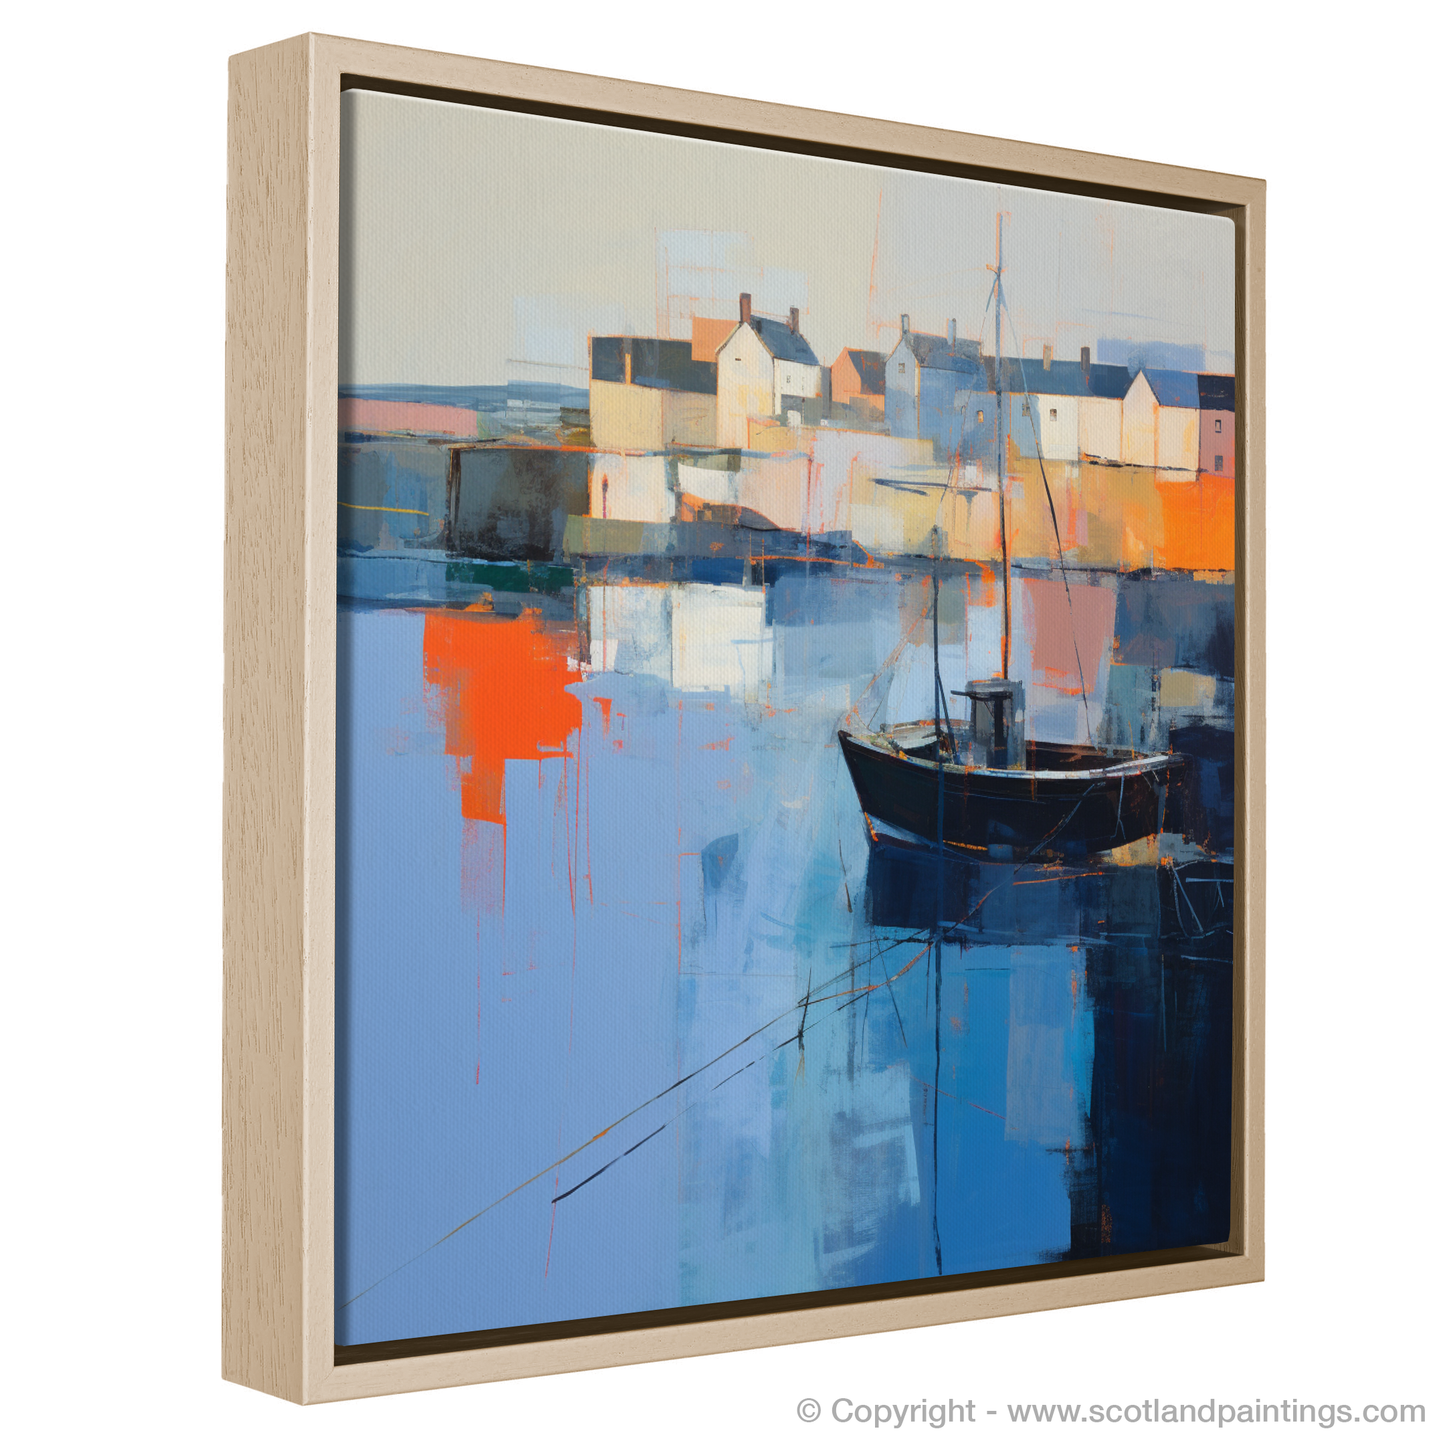 Dusk at Anstruther Harbour: A Symphony of Light and Colour